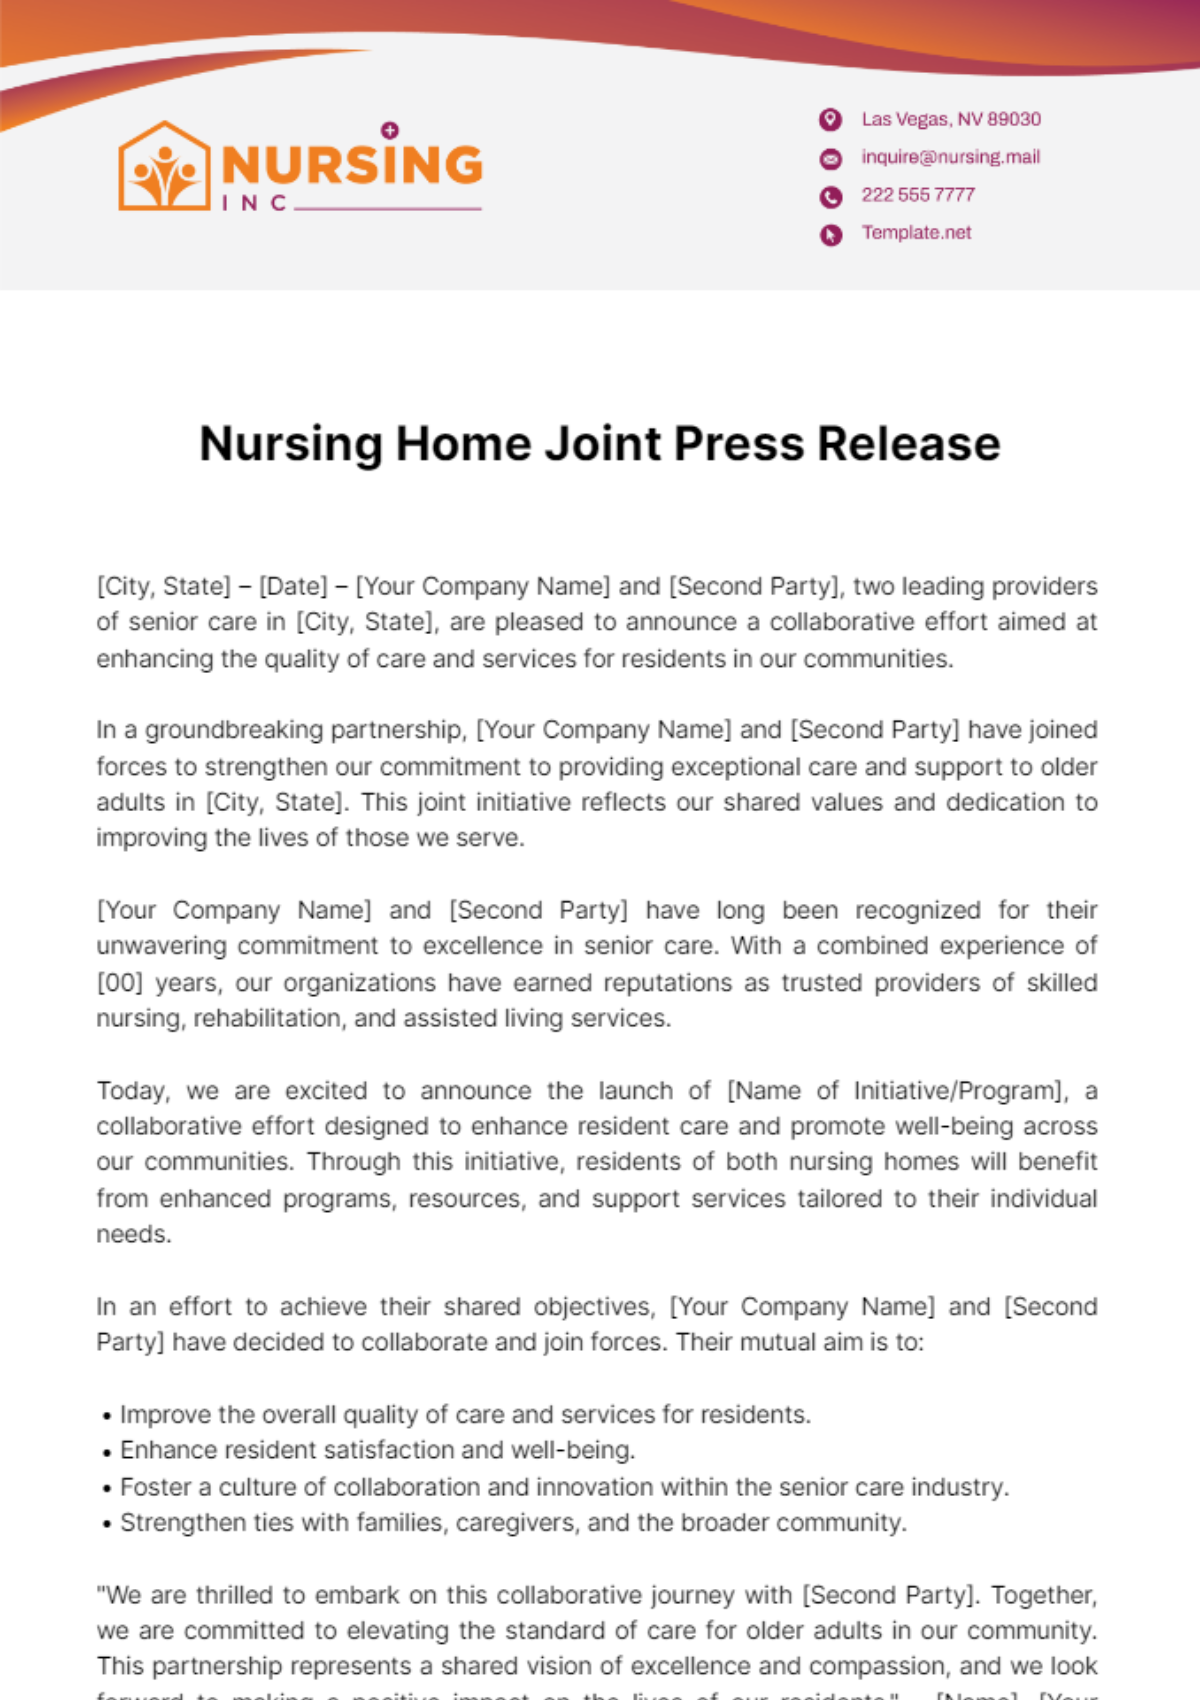 Nursing Home Joint Press Release Template